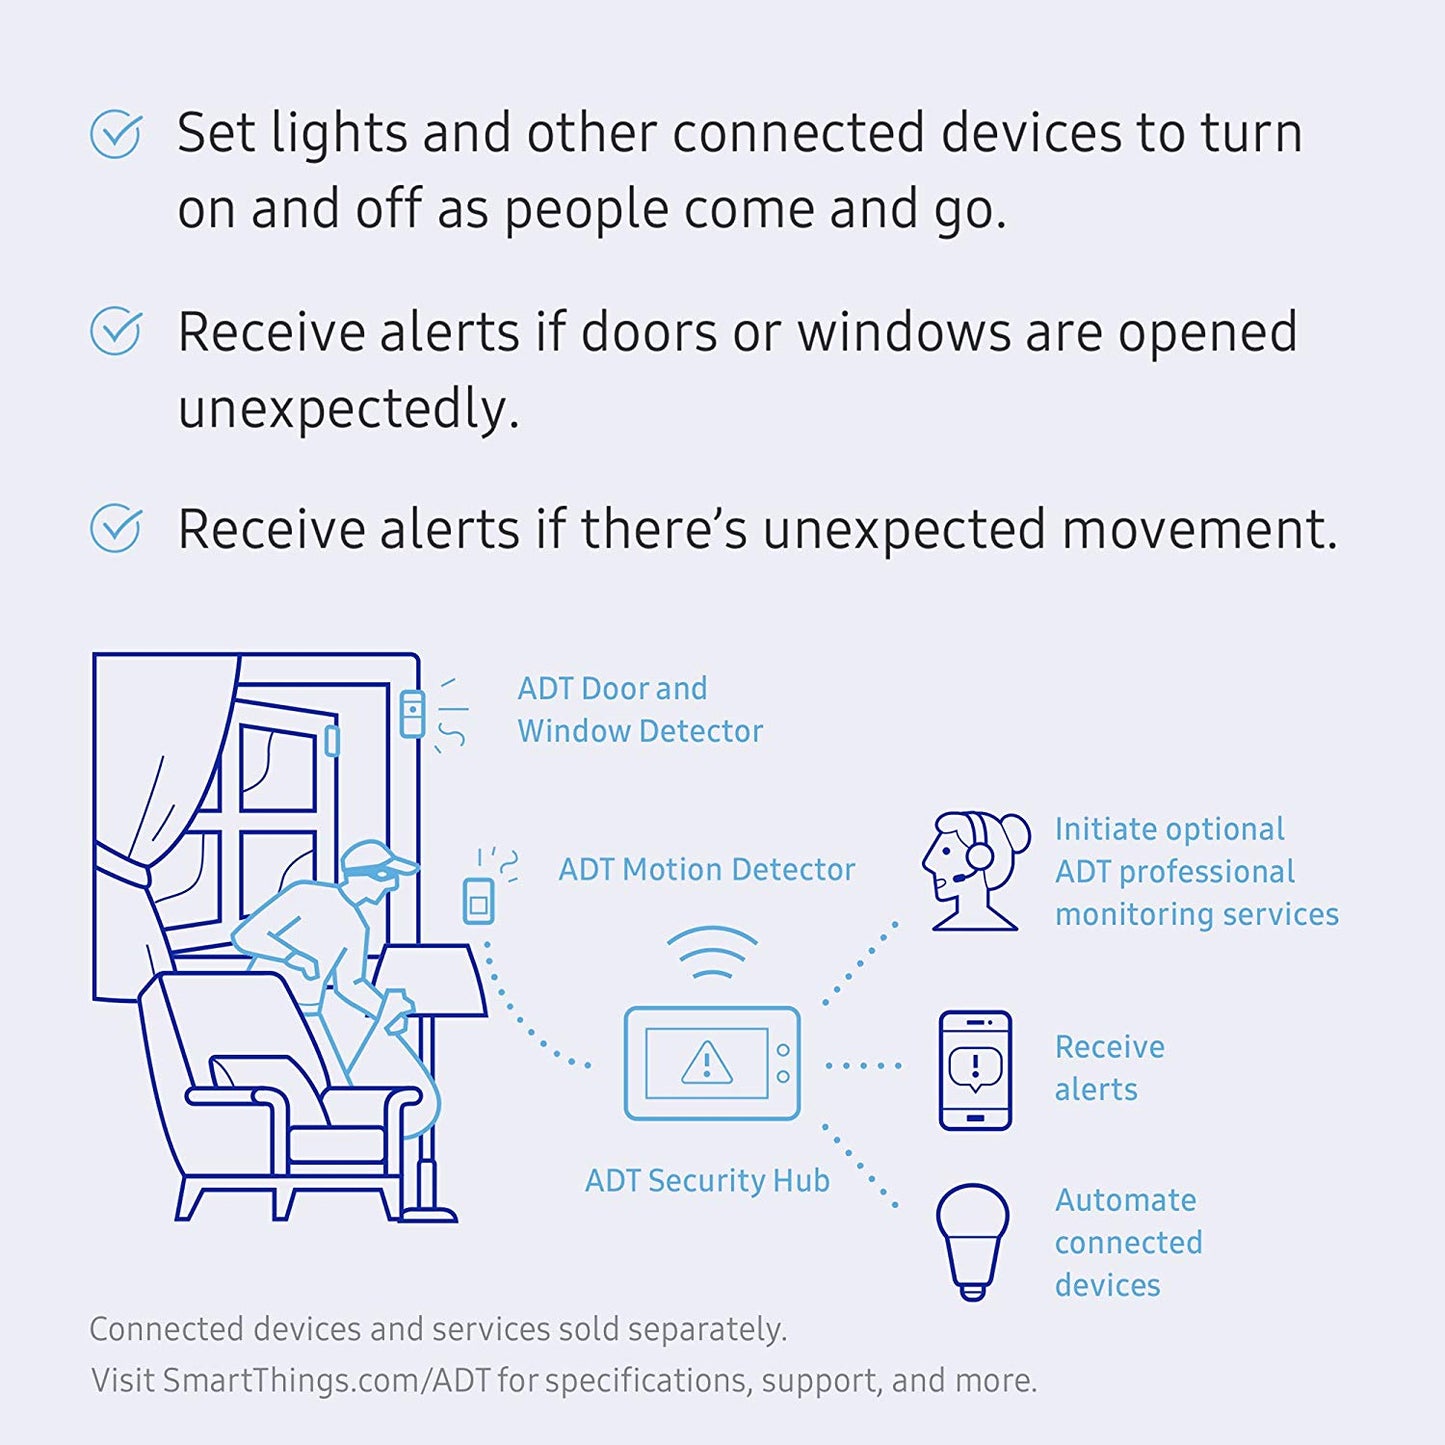 Samsung SmartThings ADT Wireless Home Security Starter Kit with DIY Smart Alarm System Hub